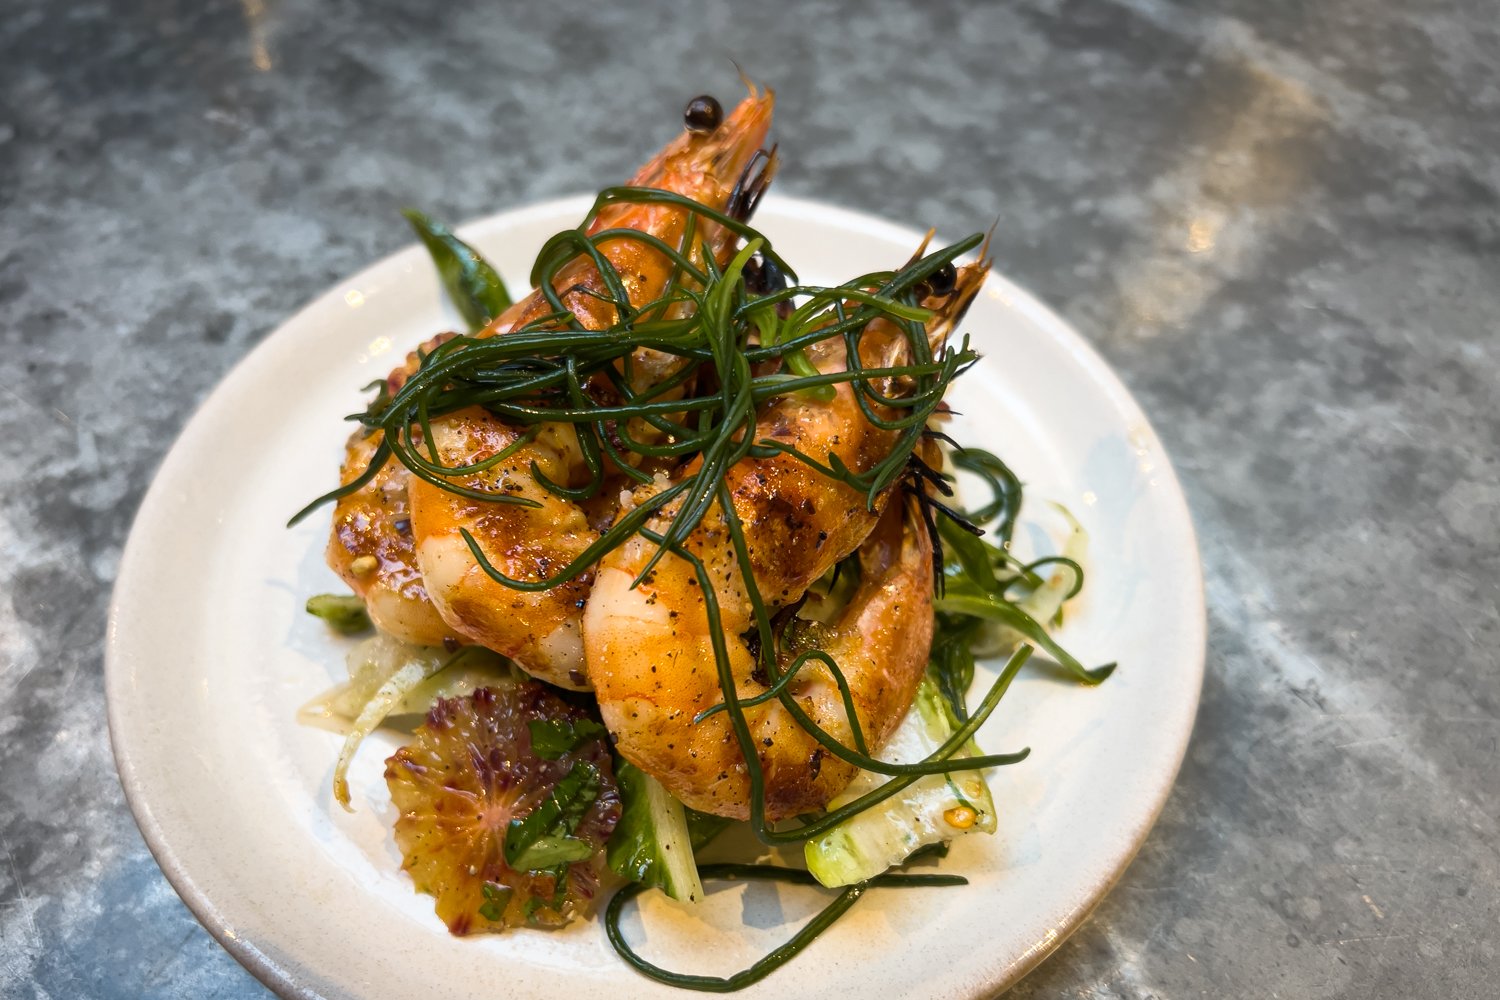  Grilled prawns: A "hidden" starter that was a stunningly good take on this classic dish. 